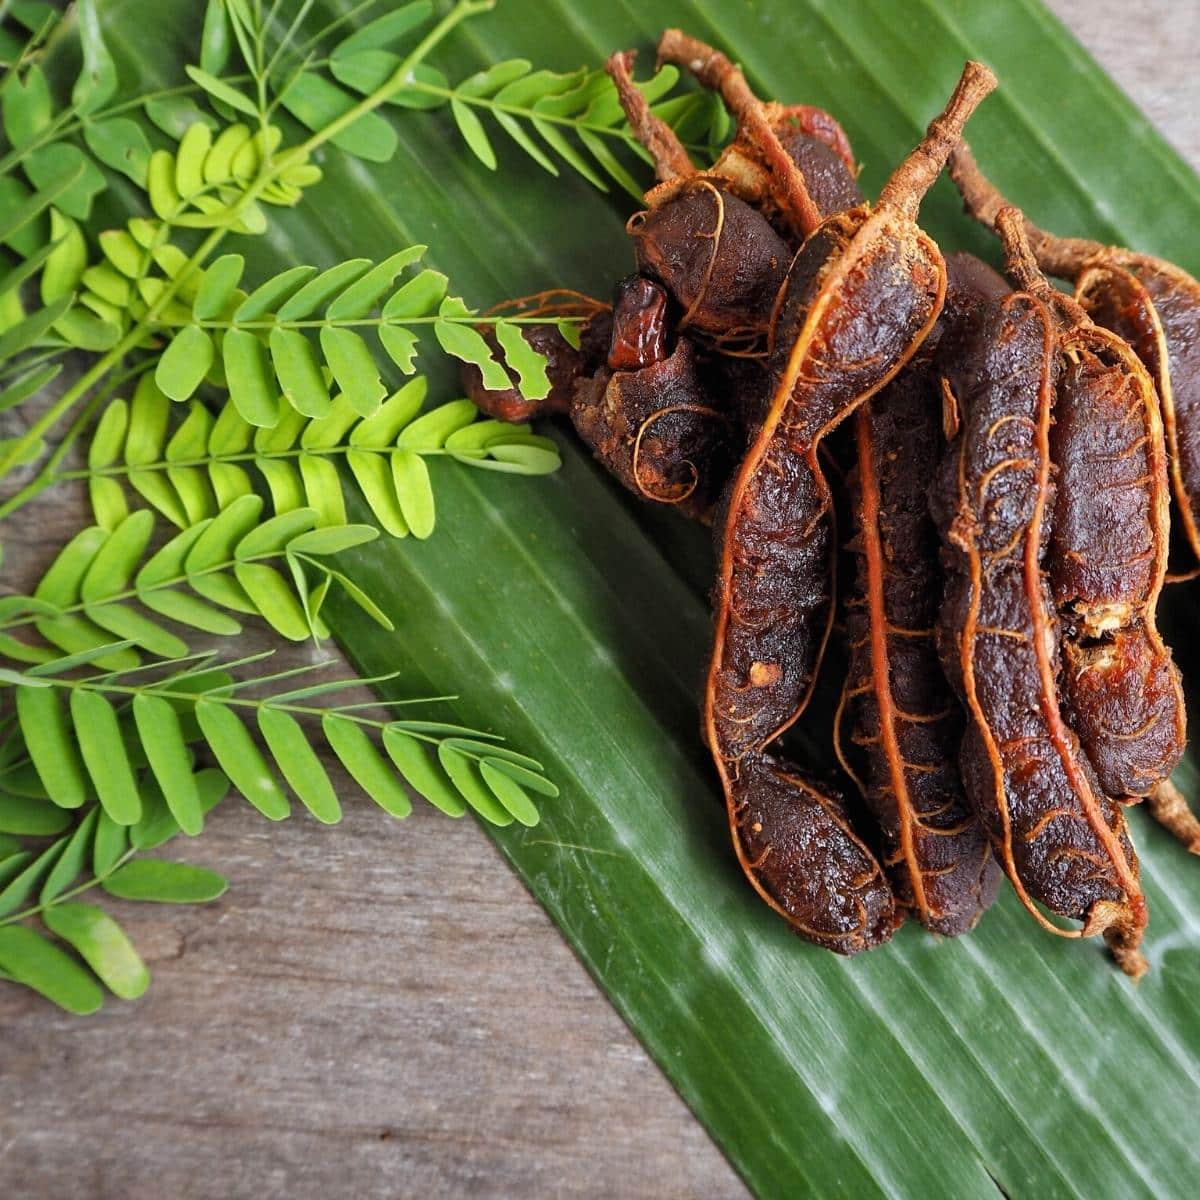 Raw tamarind fruit and tamarind leaves resting on a wooden table.